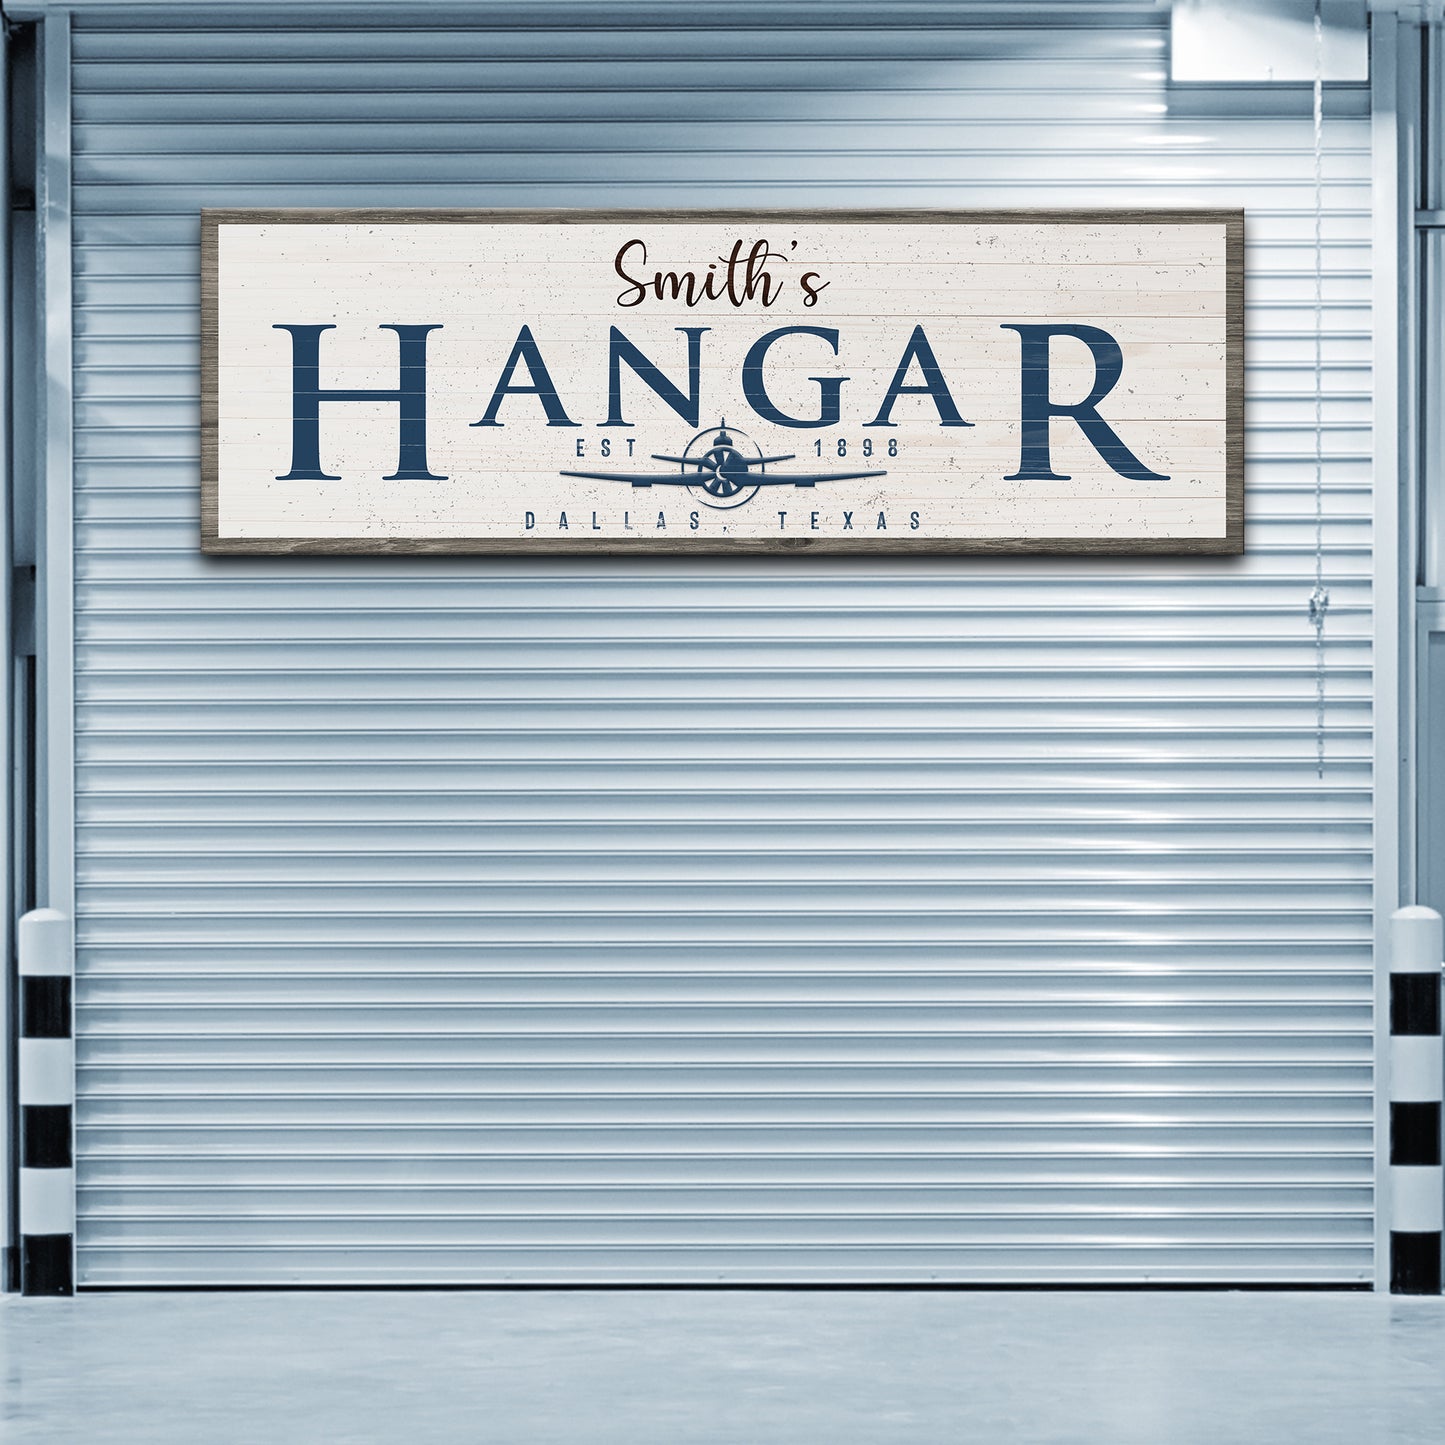 Hangar Sign Style 2 - Image by Tailored Canvases